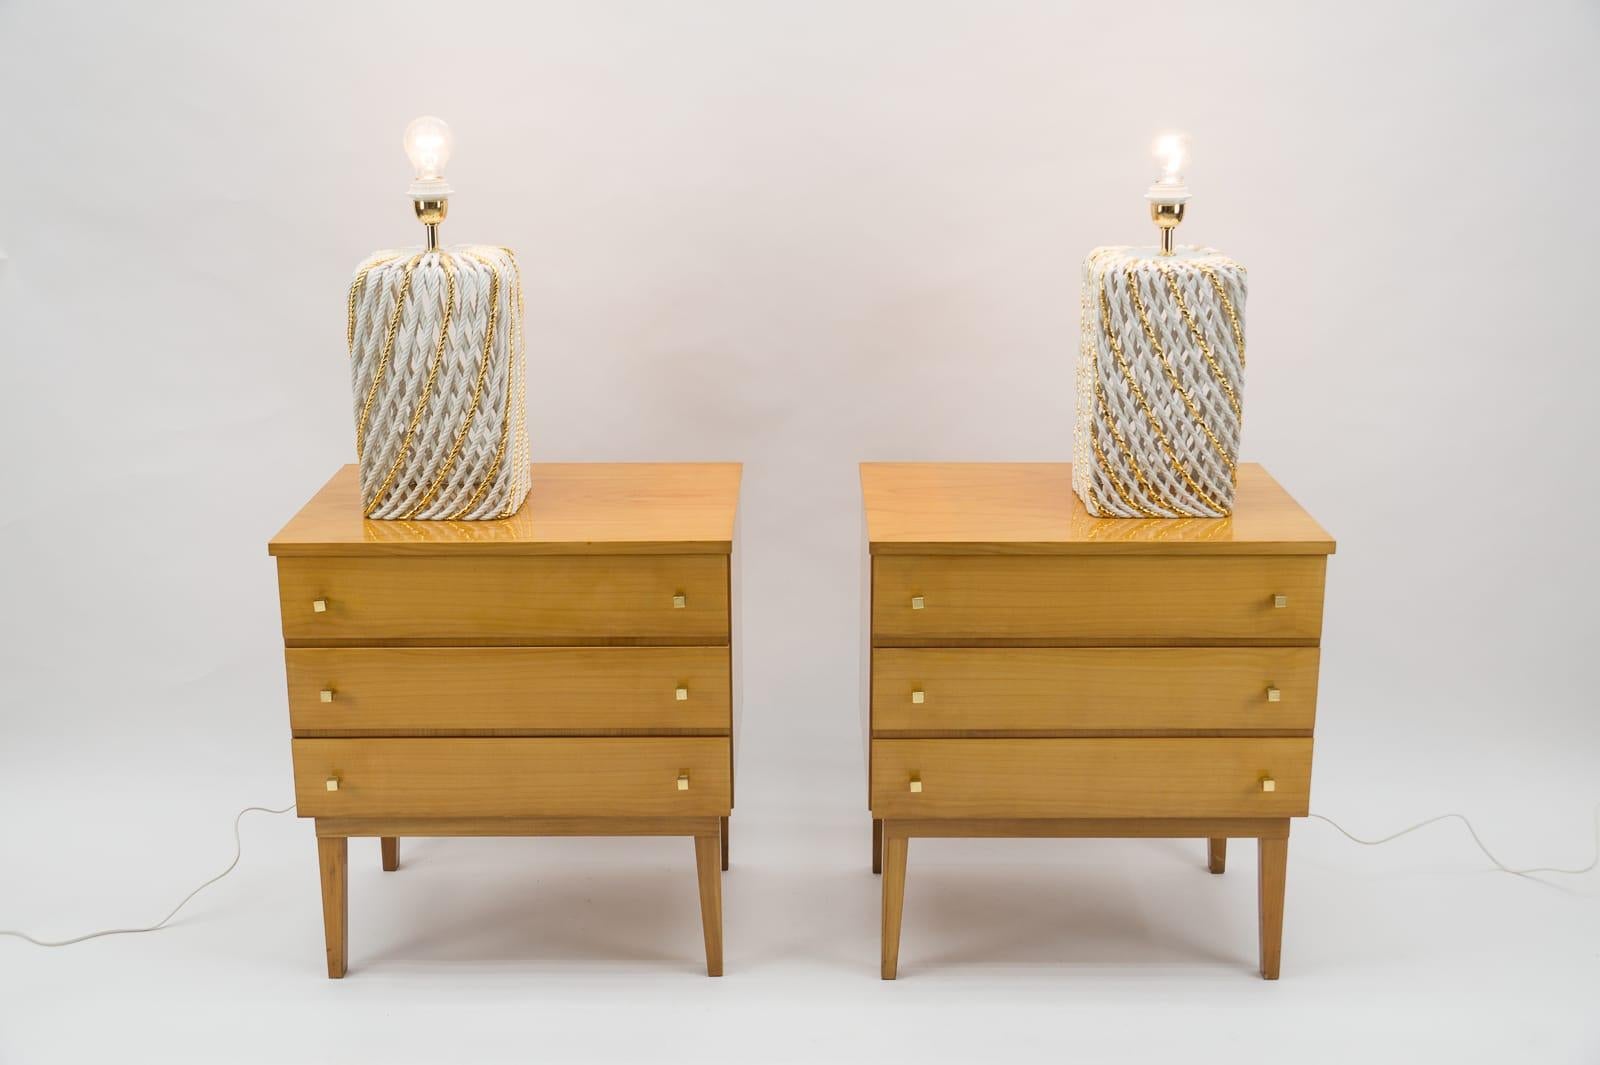  Mid-Century Modern Brass and Wood Nightstands, 1950s, Set of 2 For Sale 7